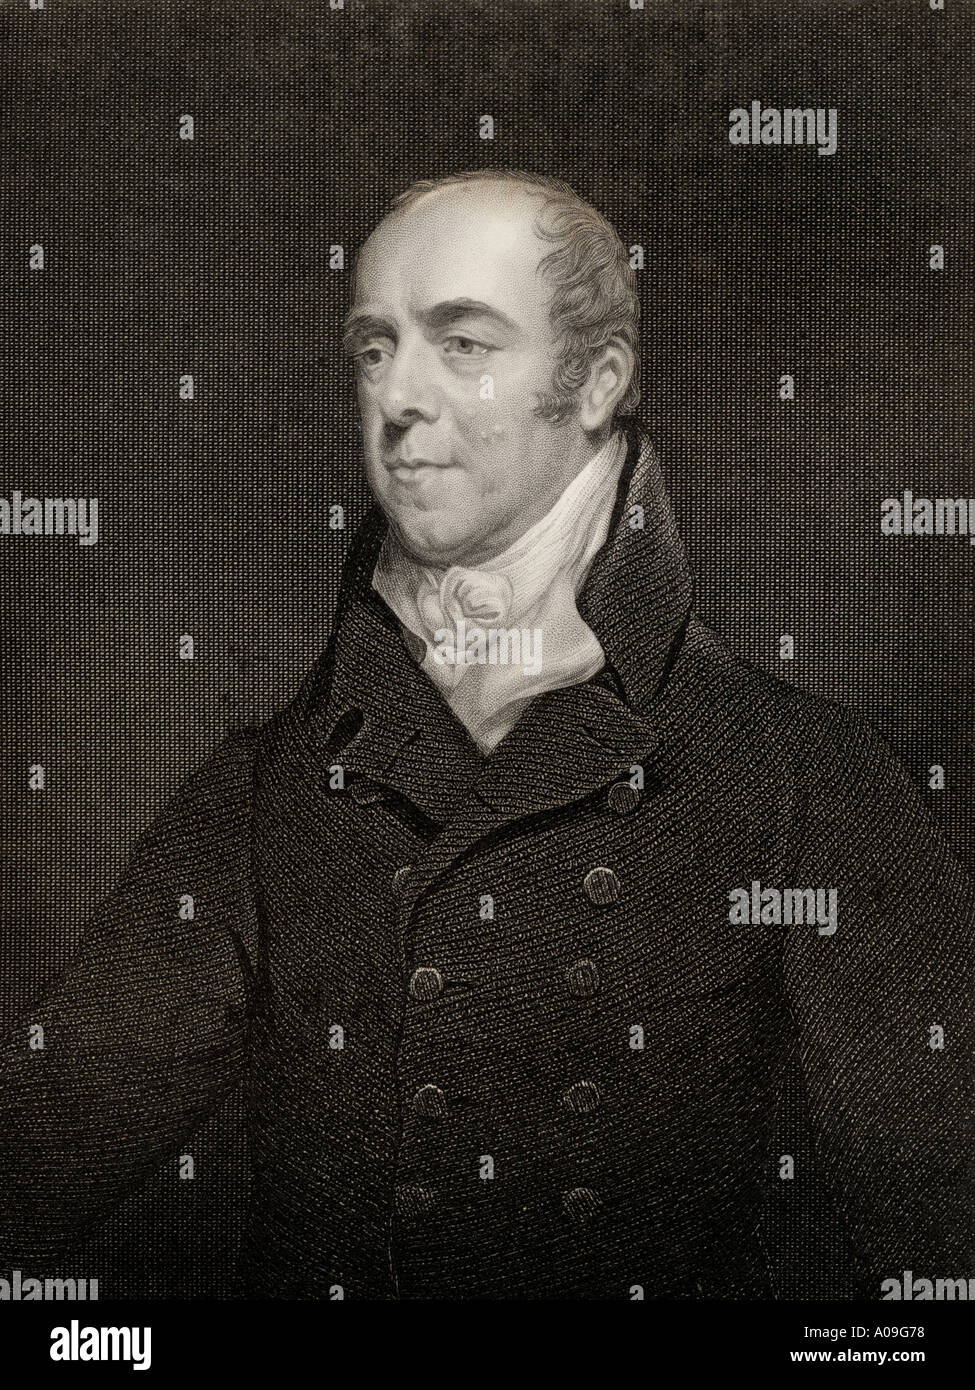 William Wyndham Grenville, 1st Baron Grenville, 1759 - 1834. British Pittite Tory, politician and Prime Minister of the United Kingdom. Stock Photo